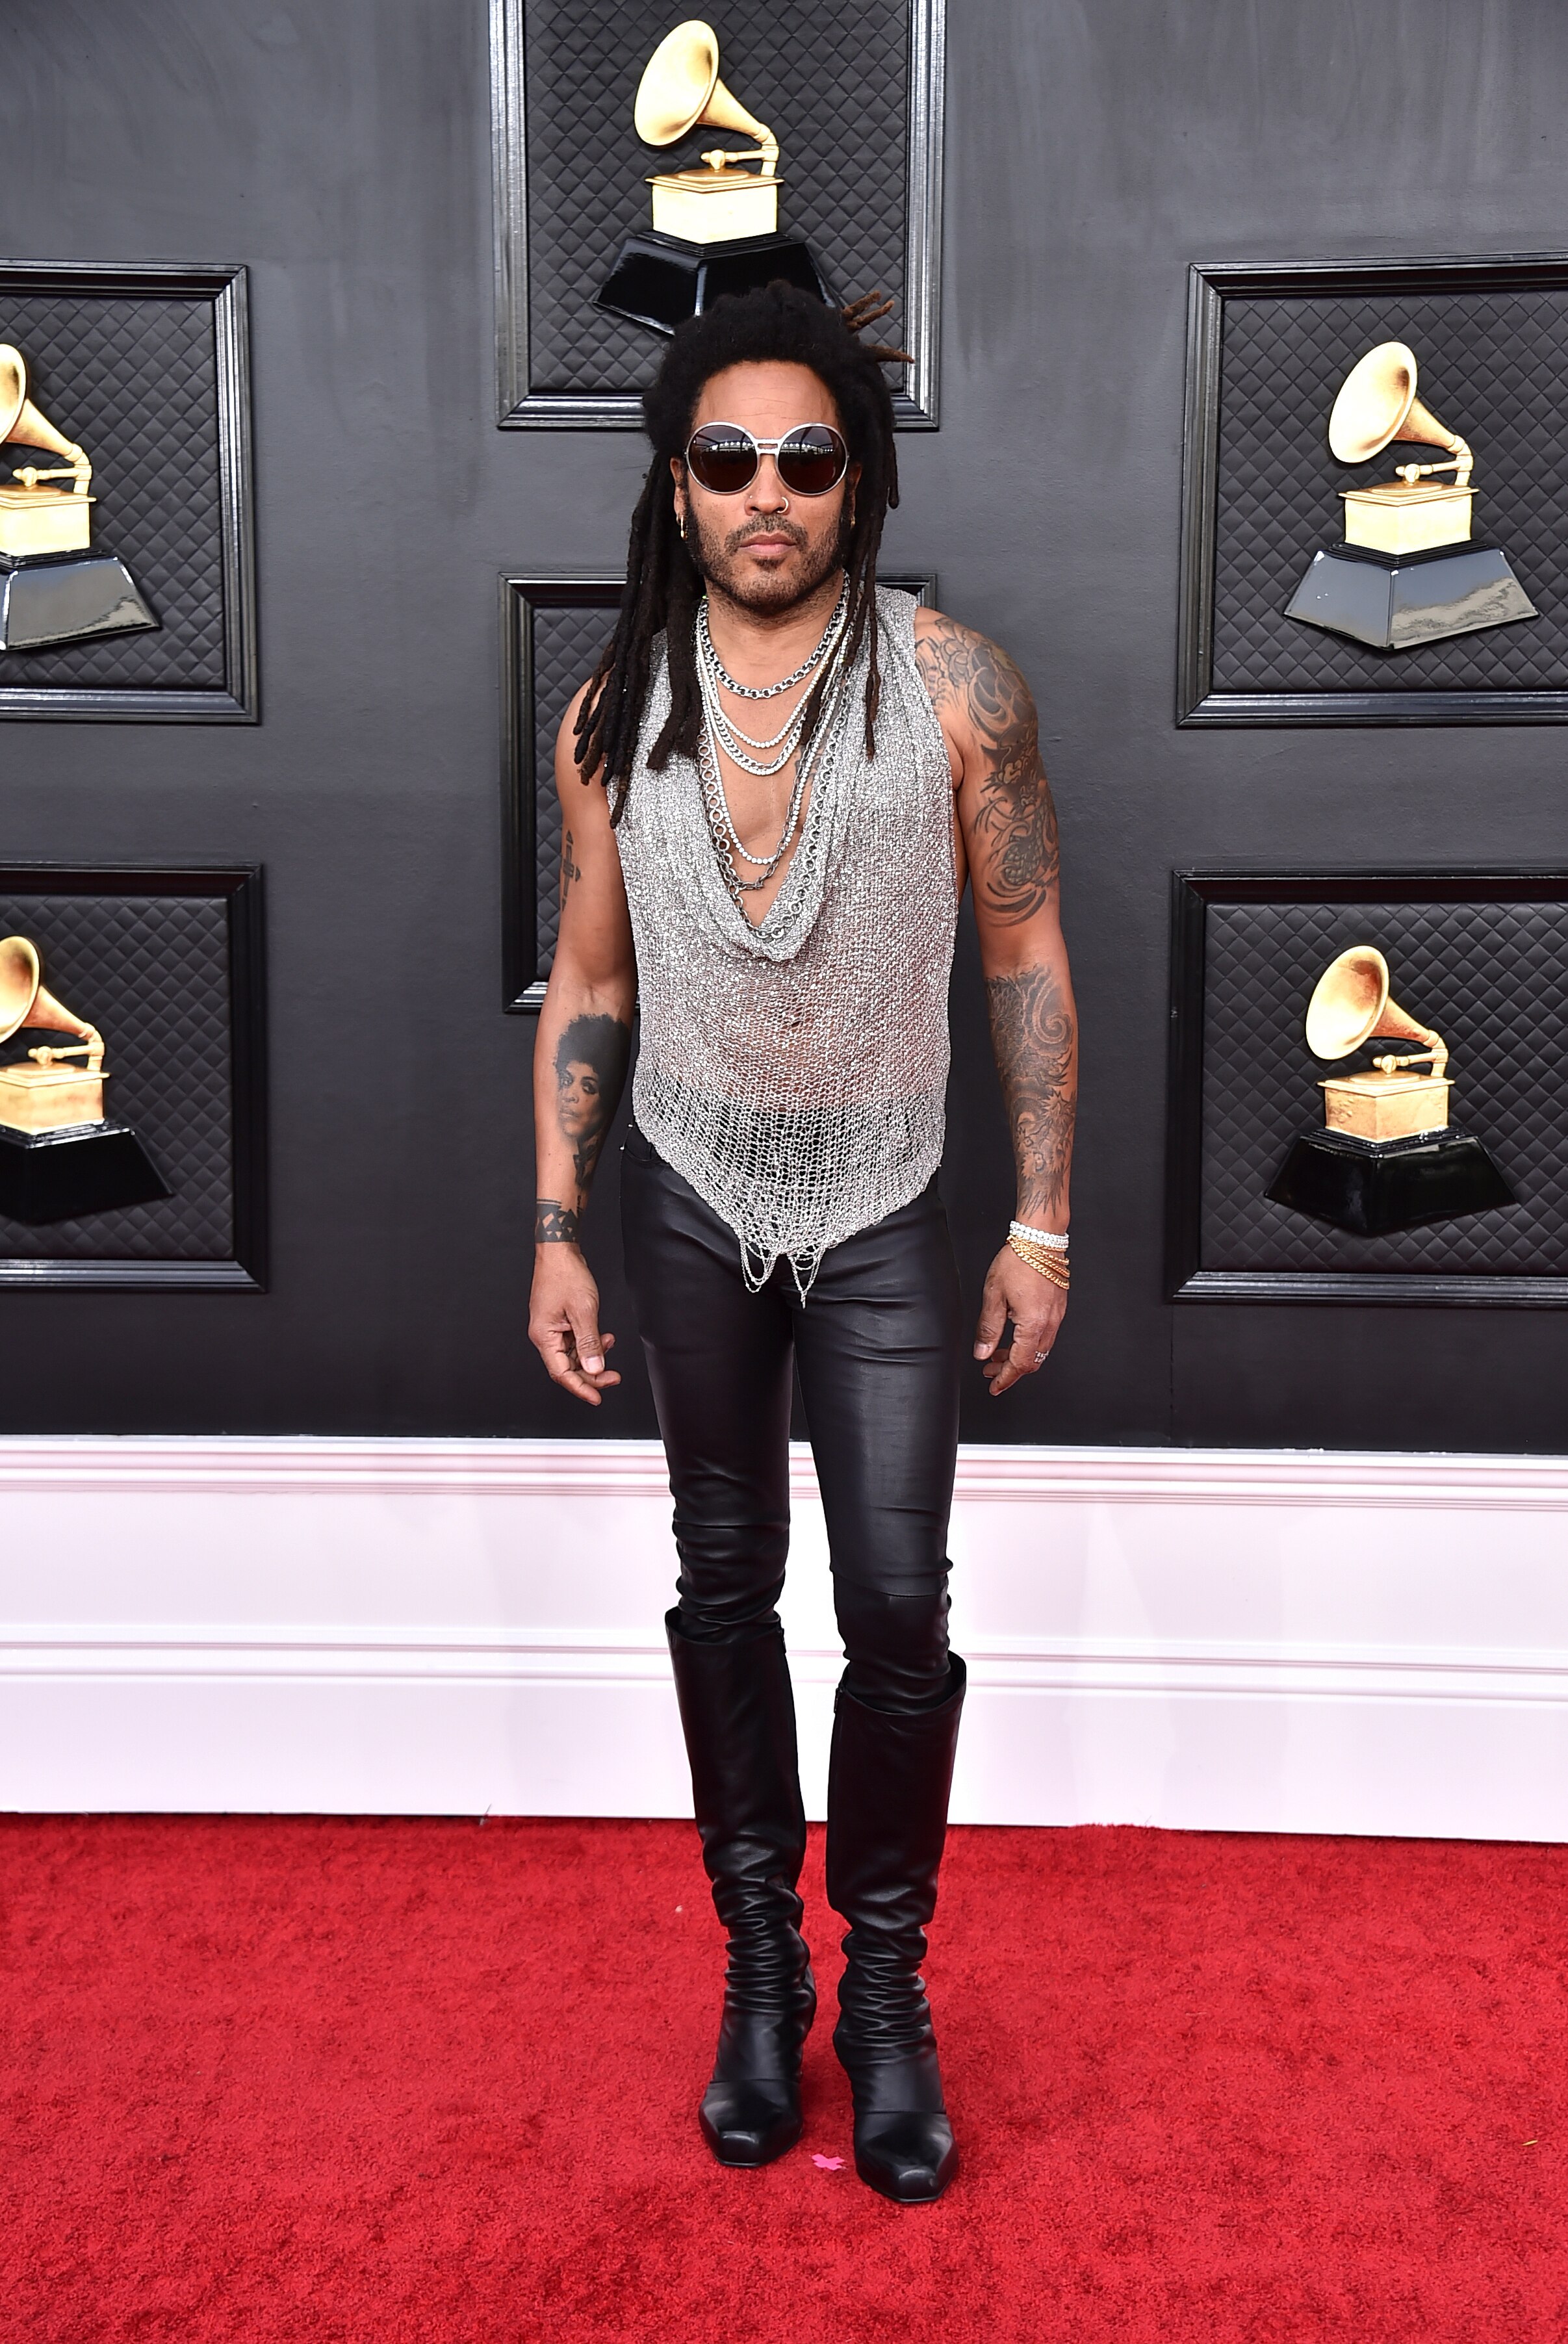 lenny kravitz poses on the red carpet wearing a chain mesh silver singlet and tight leather-look black pants with high boots